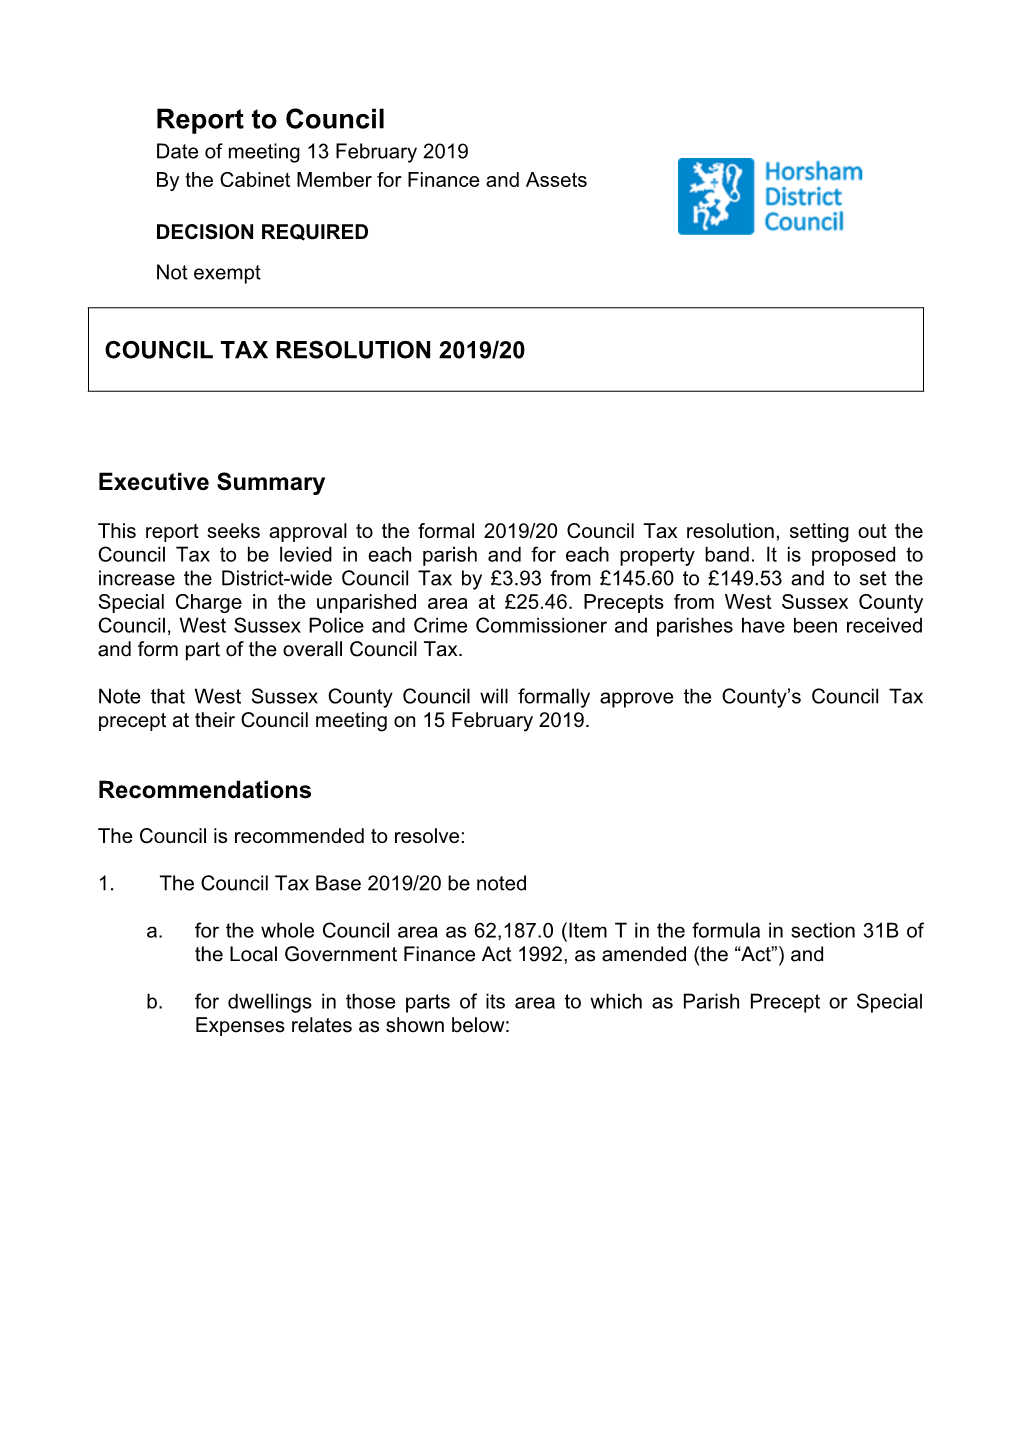 Report to Council Date of Meeting 13 February 2019 by the Cabinet Member for Finance and Assets